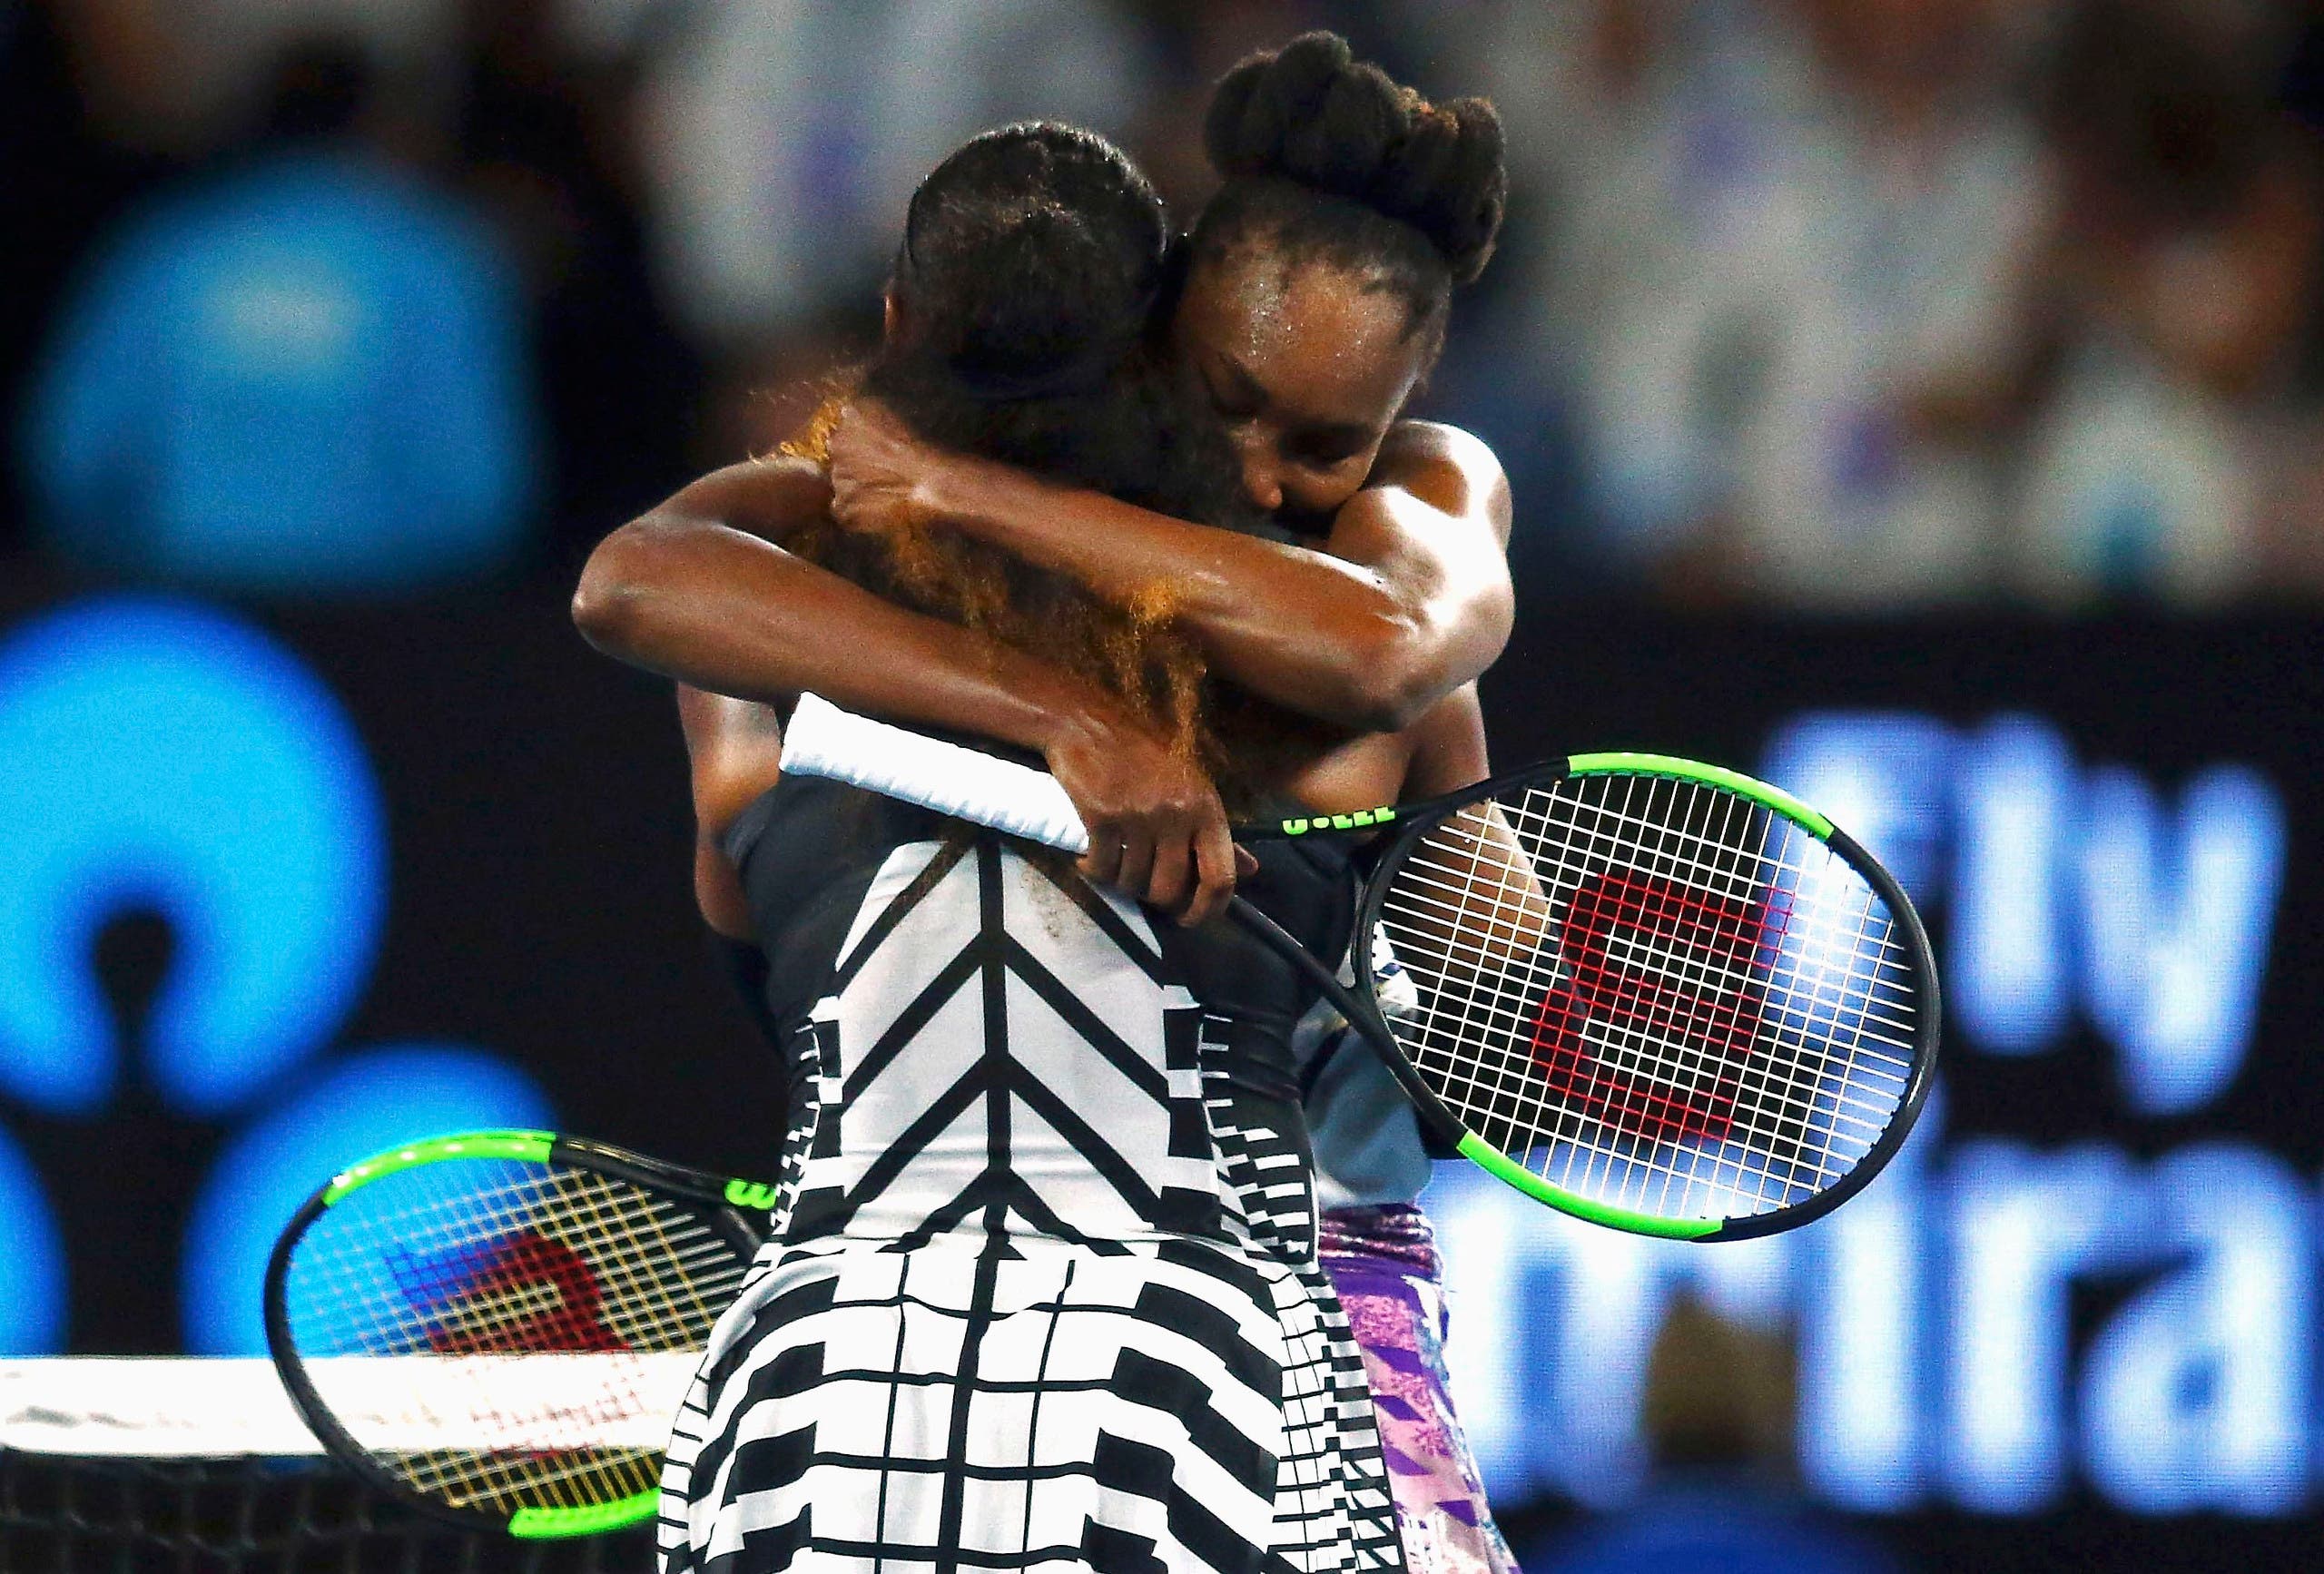 Serena sat on the court, holding both arms up for a while, before Venus walked over to her sister’s side of the net for a hug. (Reuters)